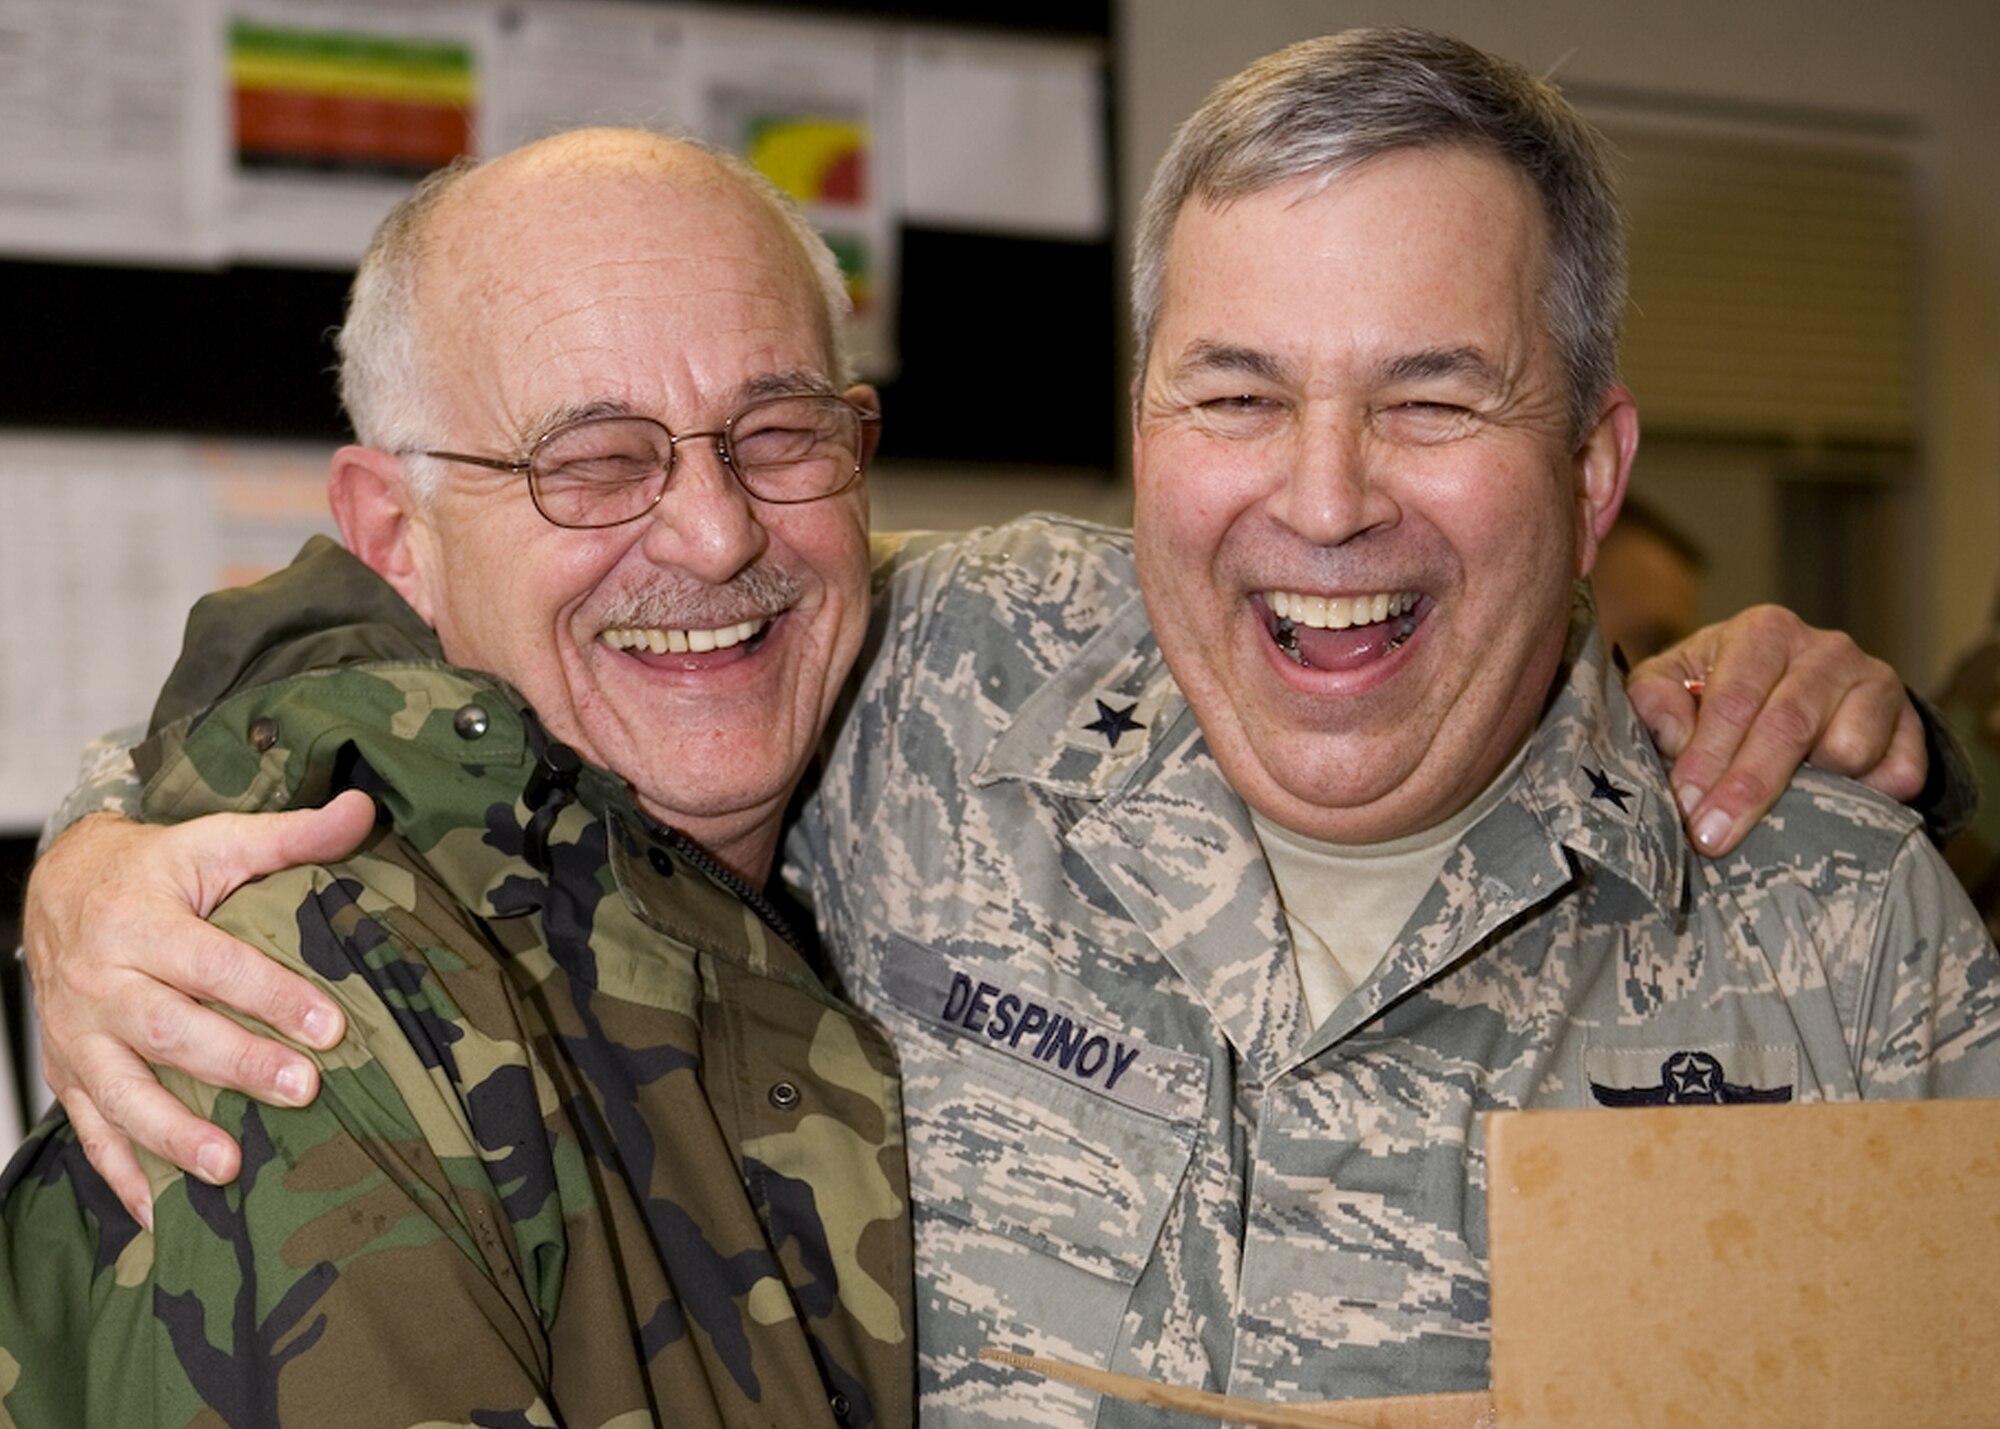 GRISSOM AIR RESERVE BASE, Ind., -- Brig. Gen. Dean Despinoy, 434th Air Refueling Wing commander, right, shares a laugh with Master Sgt. Larry Massey, a crew chief with the 434th Aircraft Maintenance Squadron, during the December unit training assembly. General Despinoy and other wing leadership passed out candy canes to Airmen on base before members signed out on Sunday. (U.S. Air Force photo/Senior Airman Omar Delacruz)